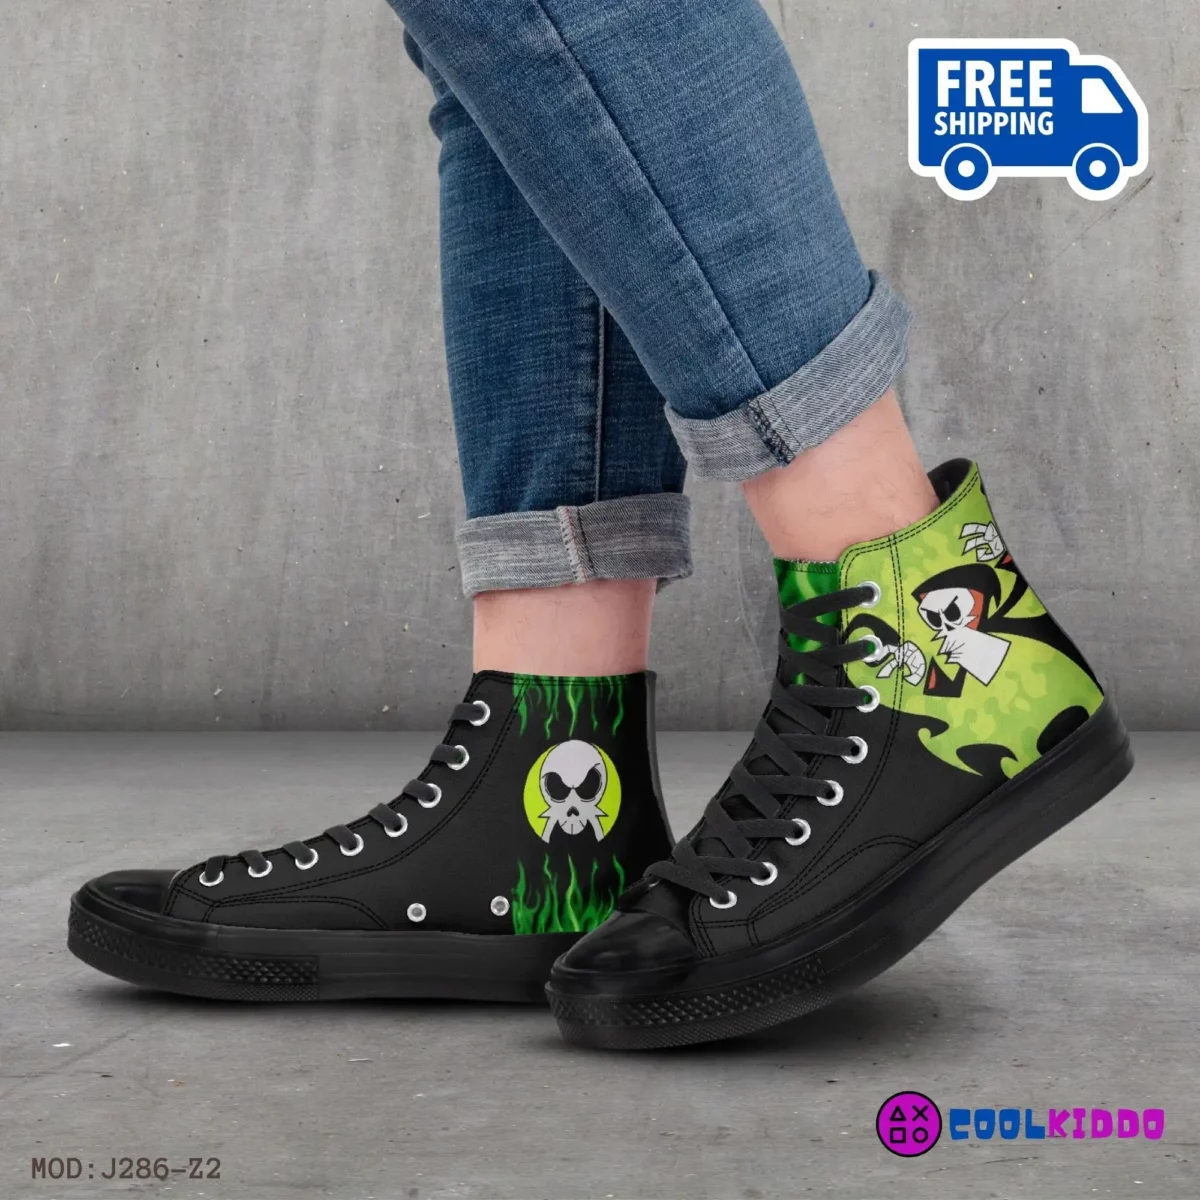 Grim Black and Green High-Top Canvas Shoes | From The Grim Adventures of Billy and Mandy | Adult/Youth – Black Sole Grim Sneakers Cool Kiddo 20